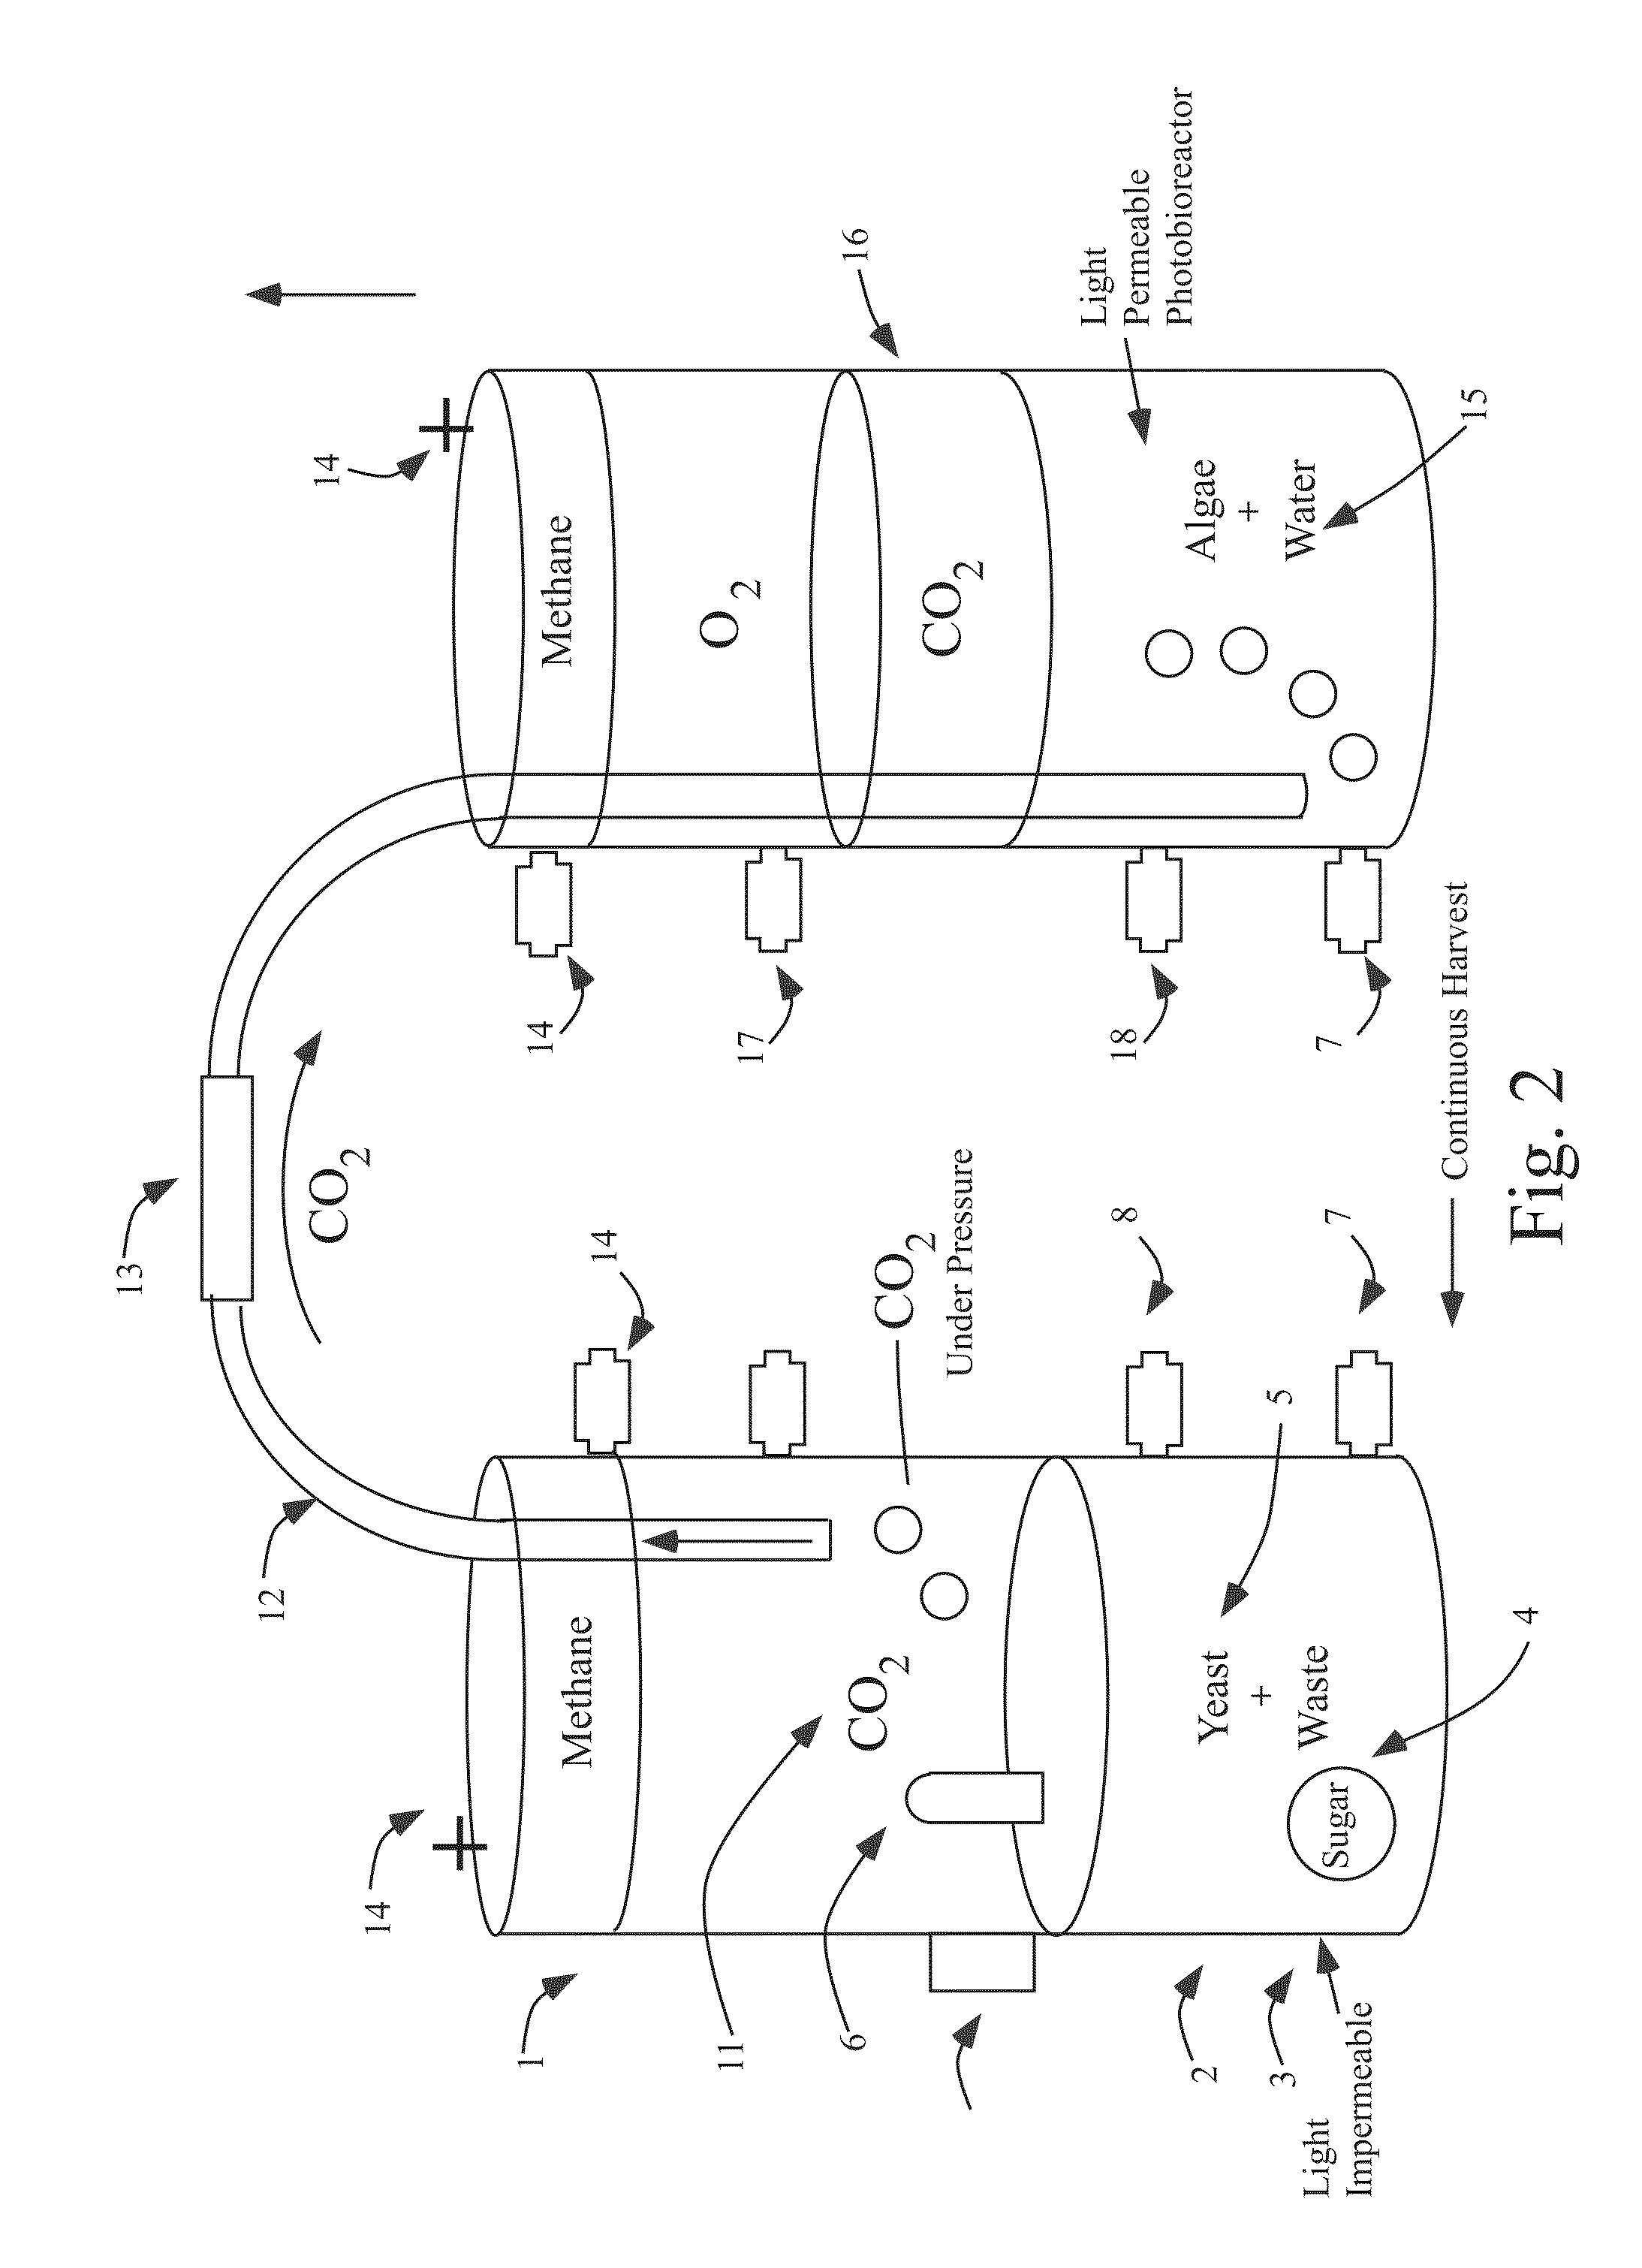 Systems and methods for production of algal biomass